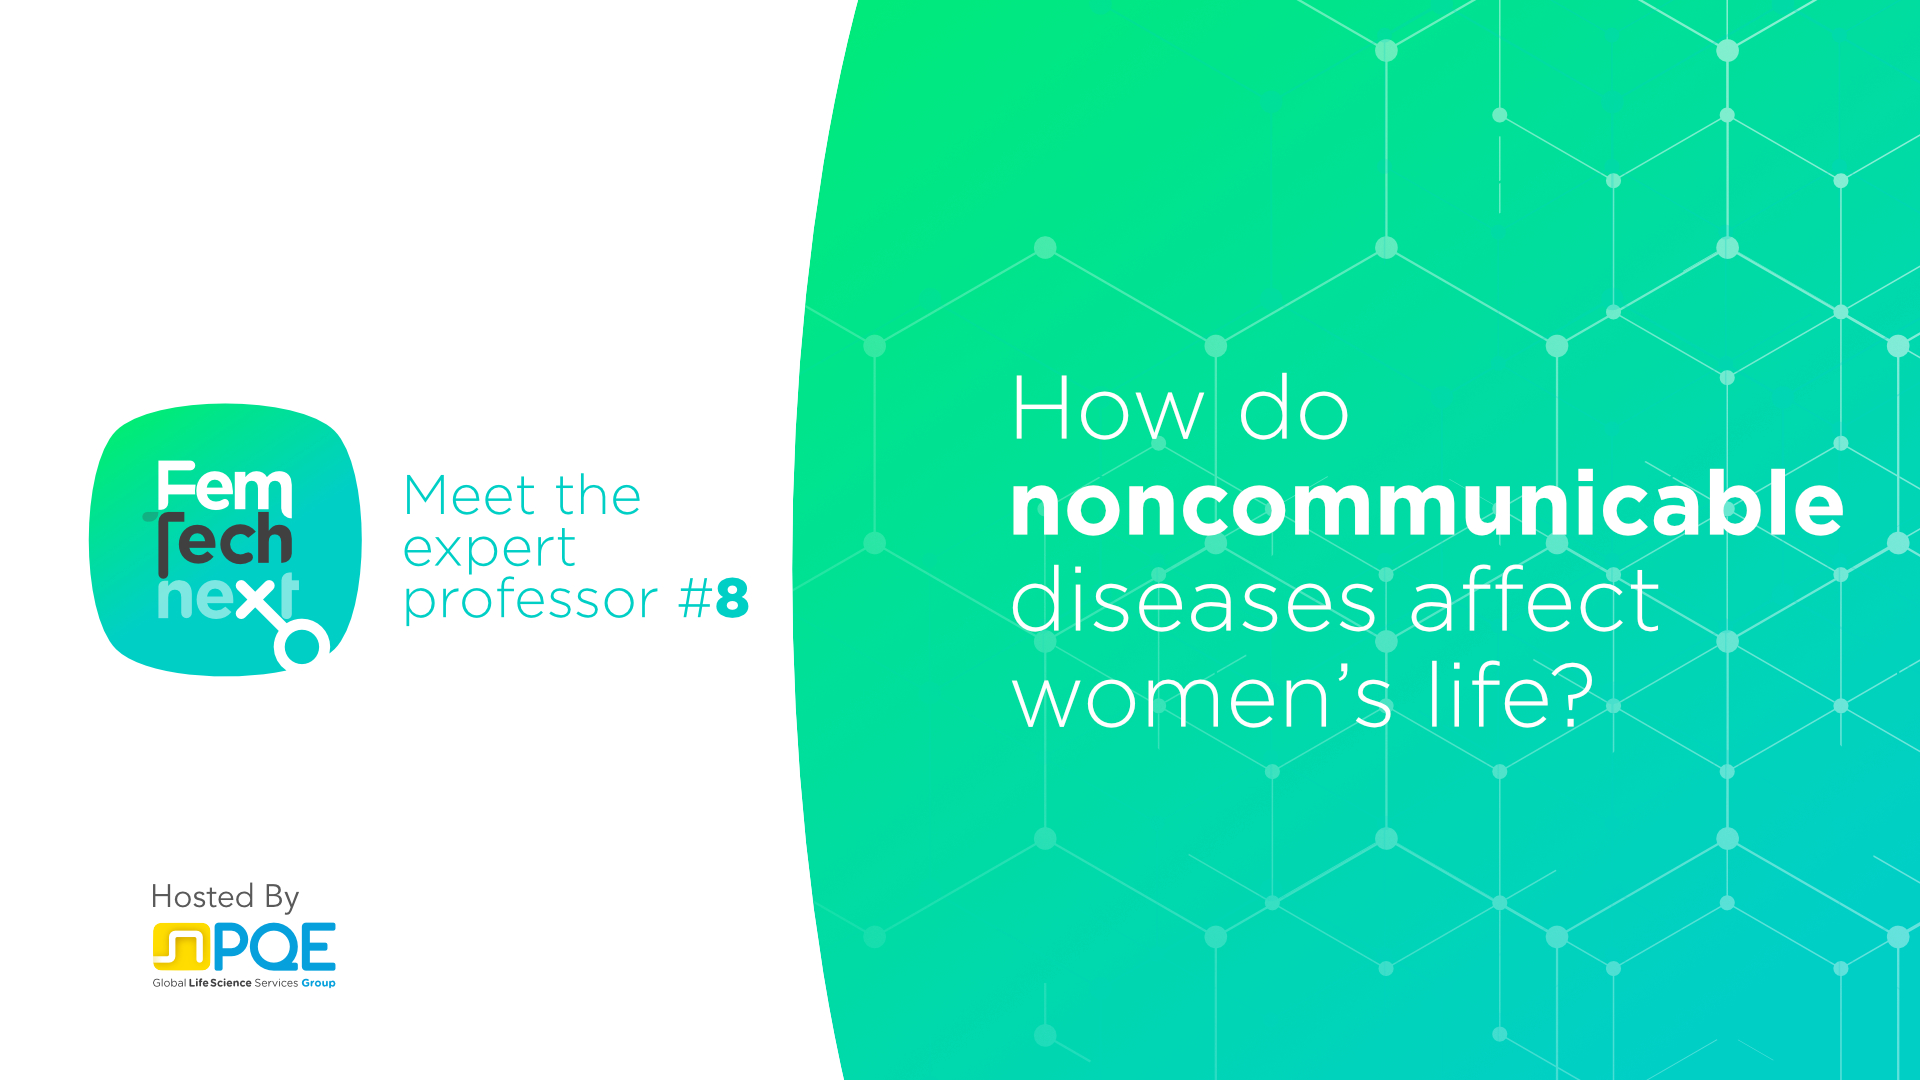 Ep. 8 - How do noncommunicable diseases affect women’s life?